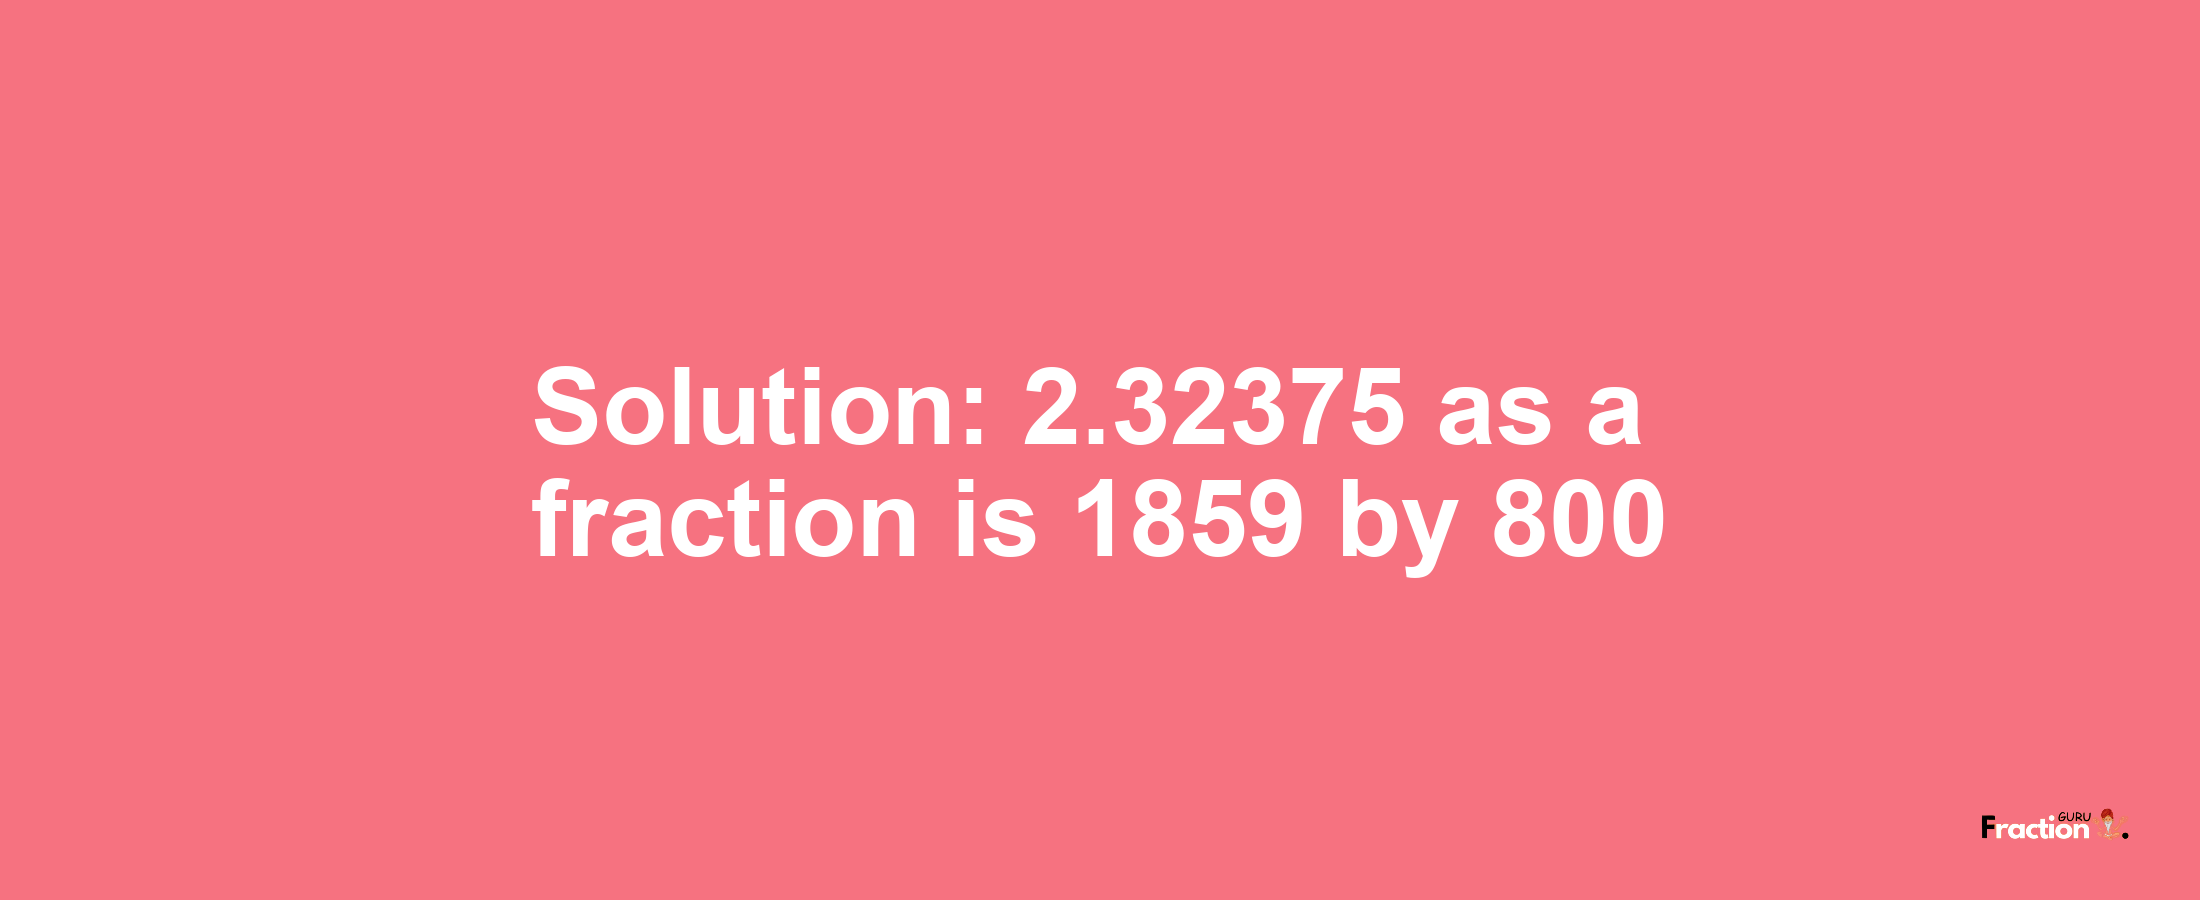 Solution:2.32375 as a fraction is 1859/800